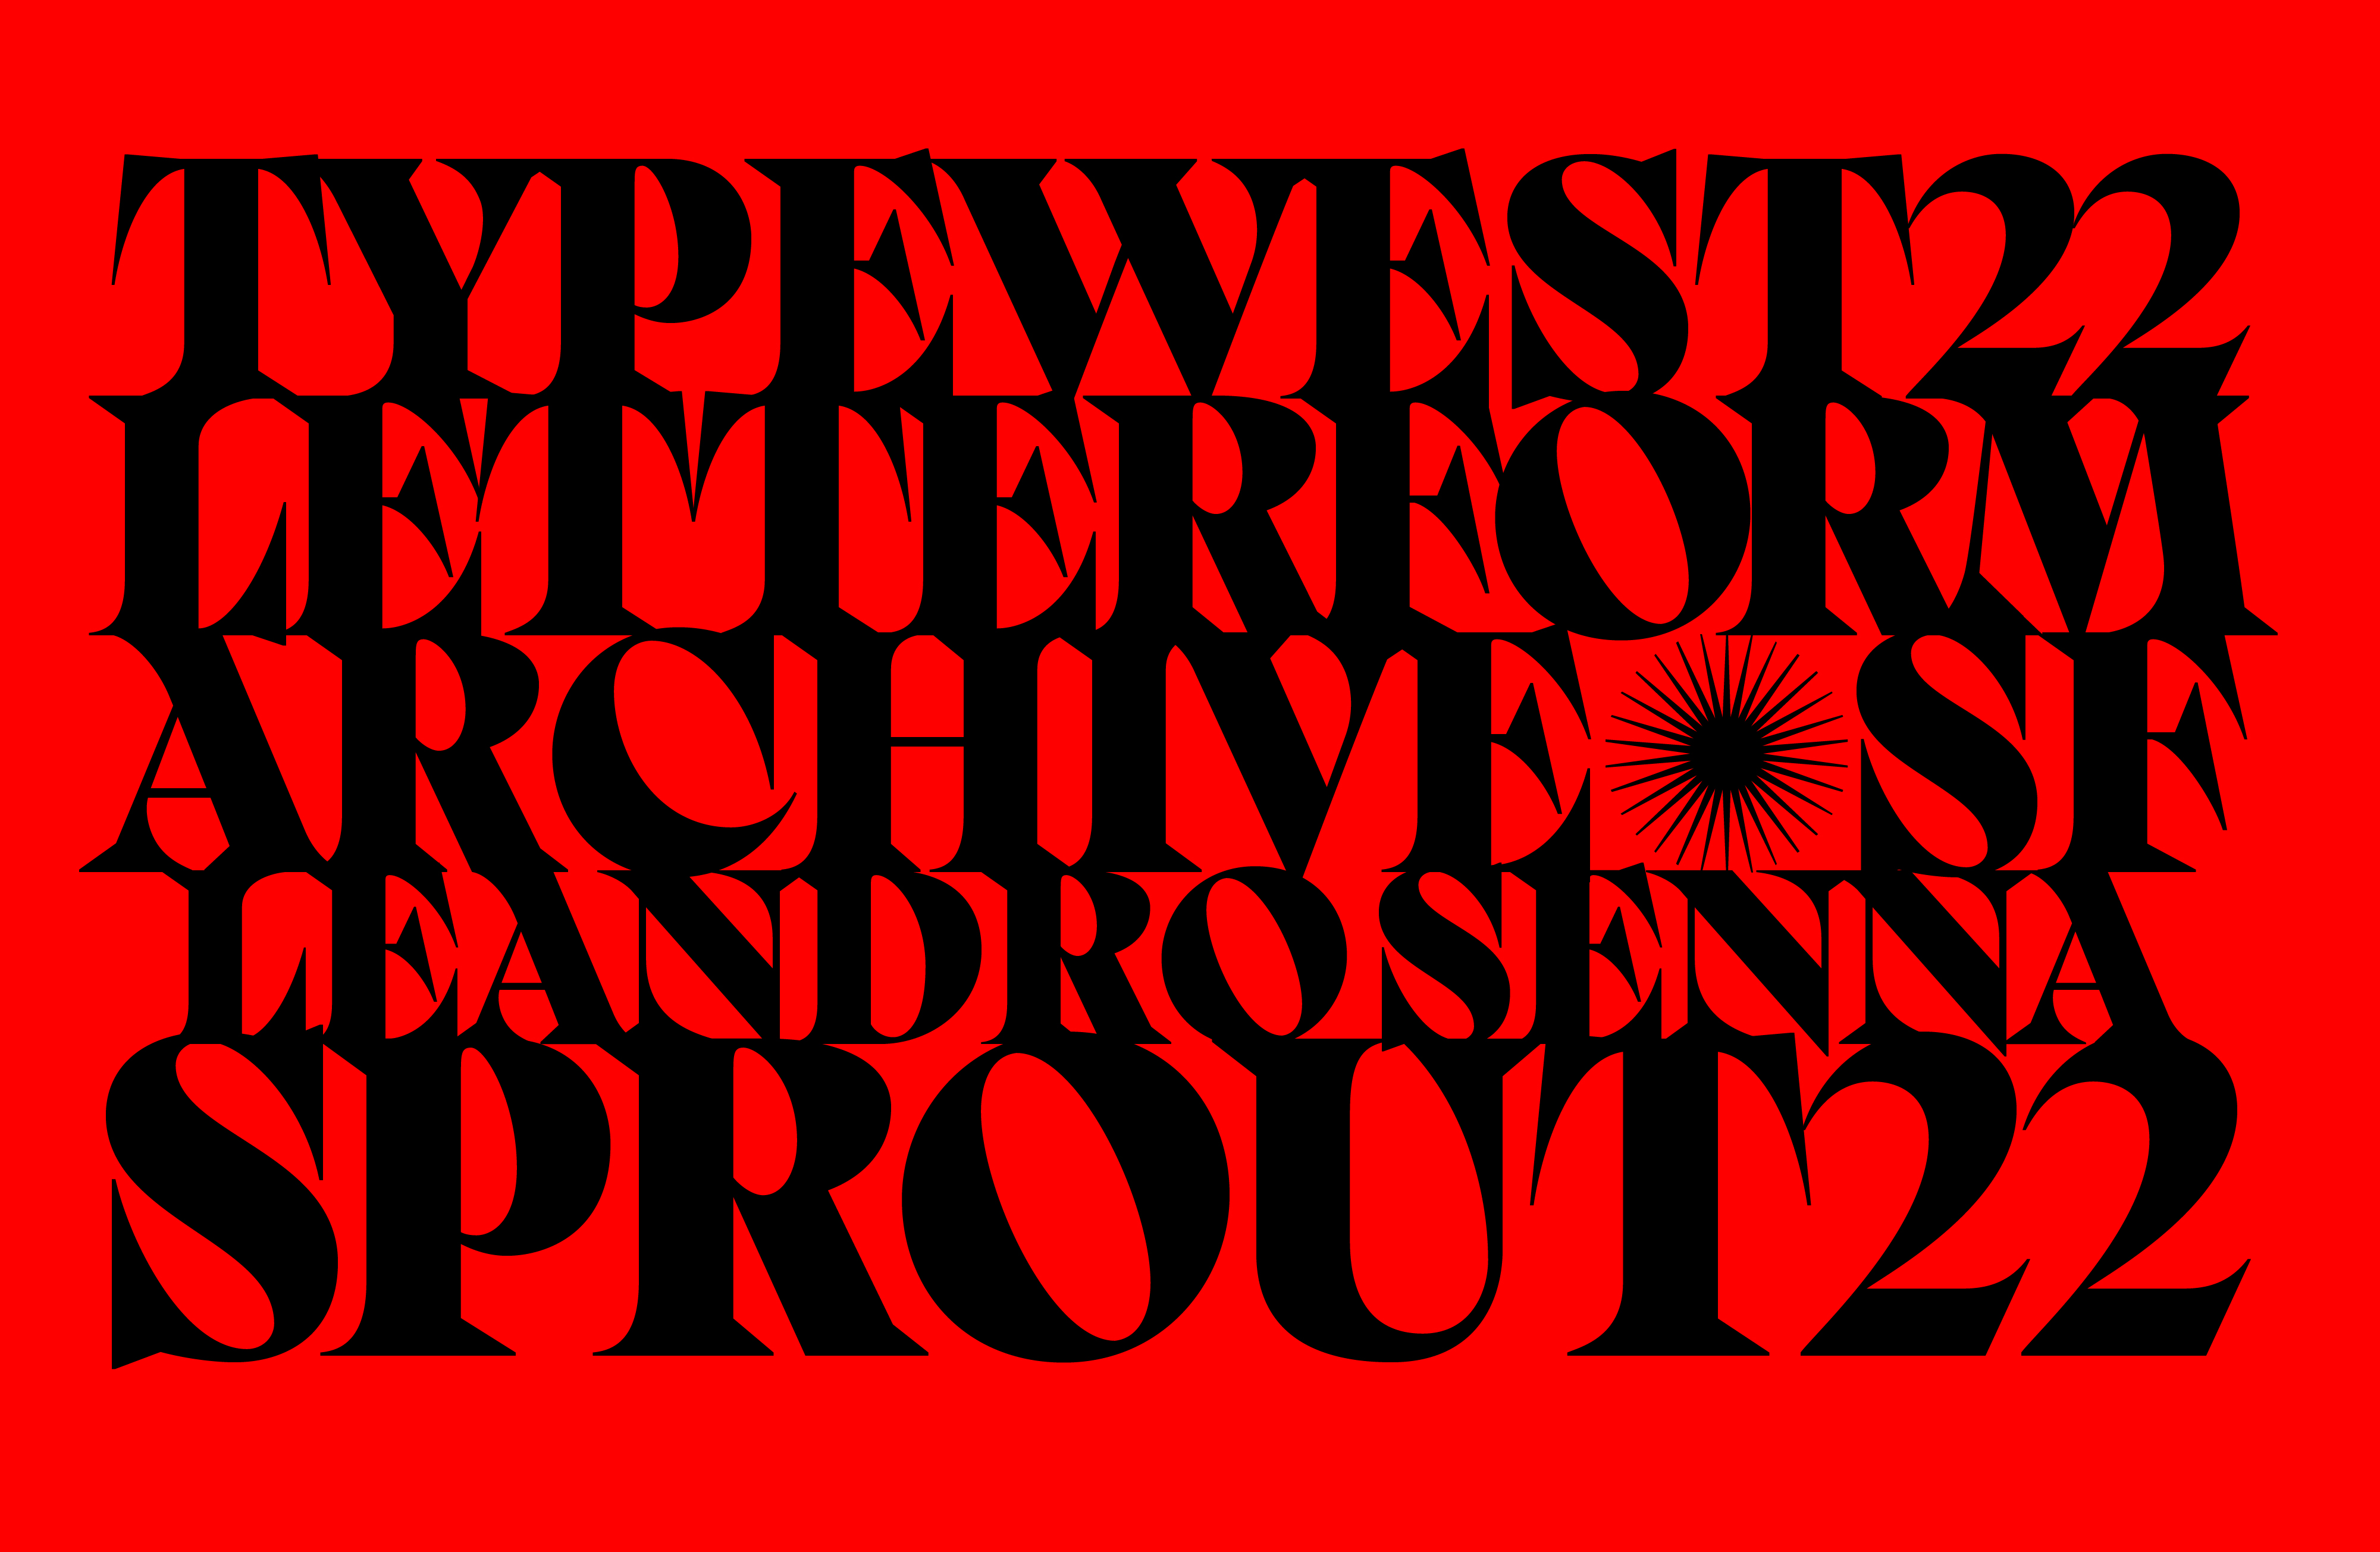 Red background, Black type image to finish the feature. it says Typewest22/LetterformArchive/SF/LeandroSenna/Sprout22